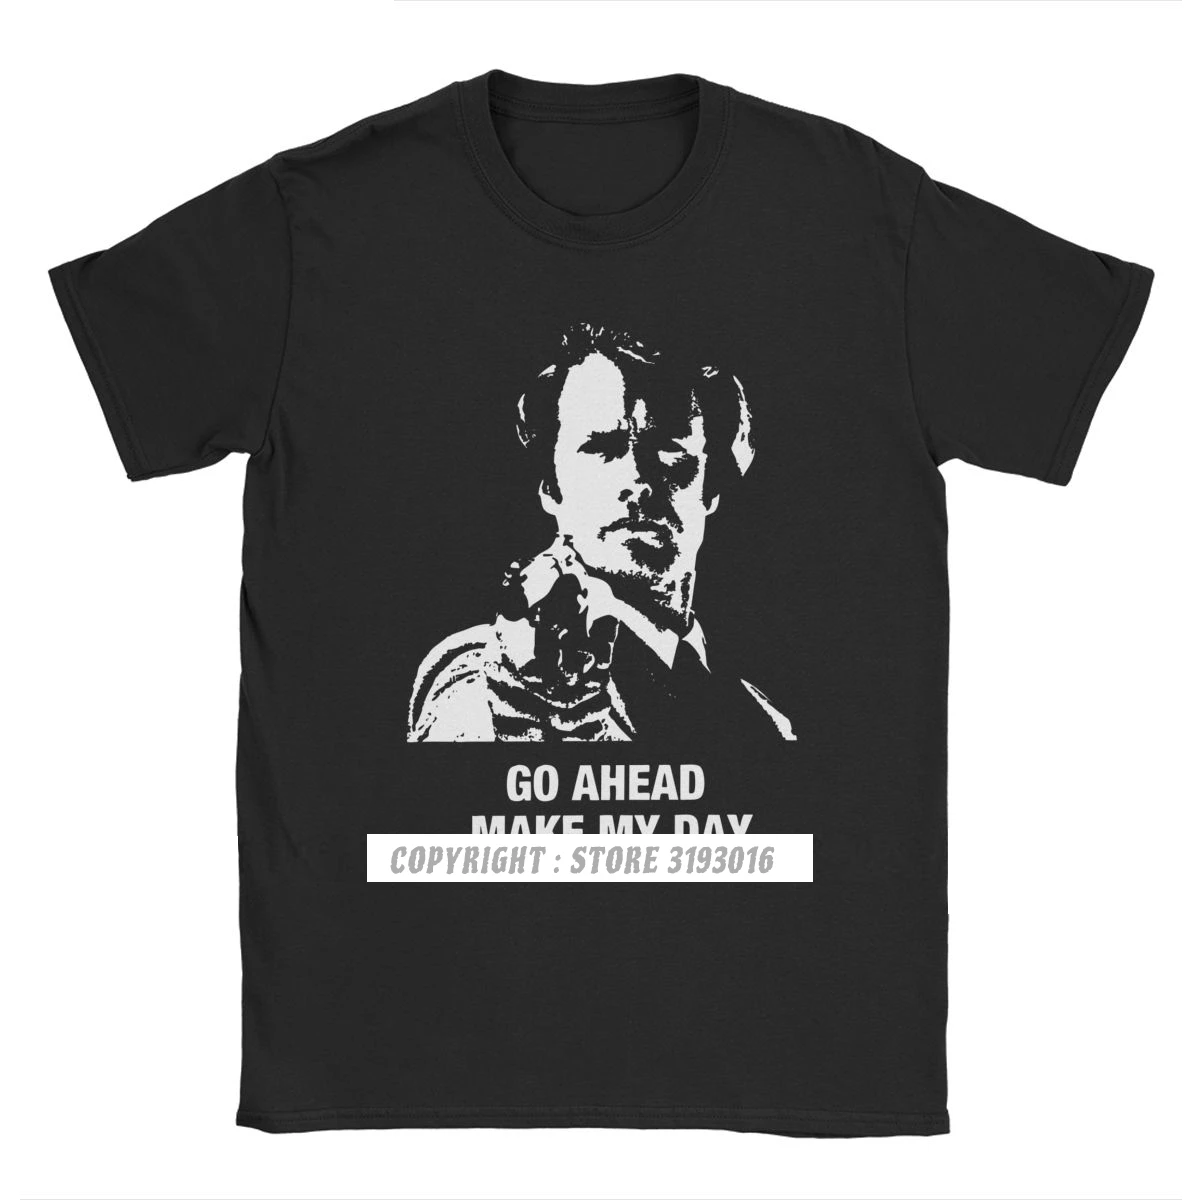 Go Ahead Make My Day Dirty Clint Eastwood T-Shirts Men Make My Day Fashion T Shirts Harajuku Cotton Tees for Men